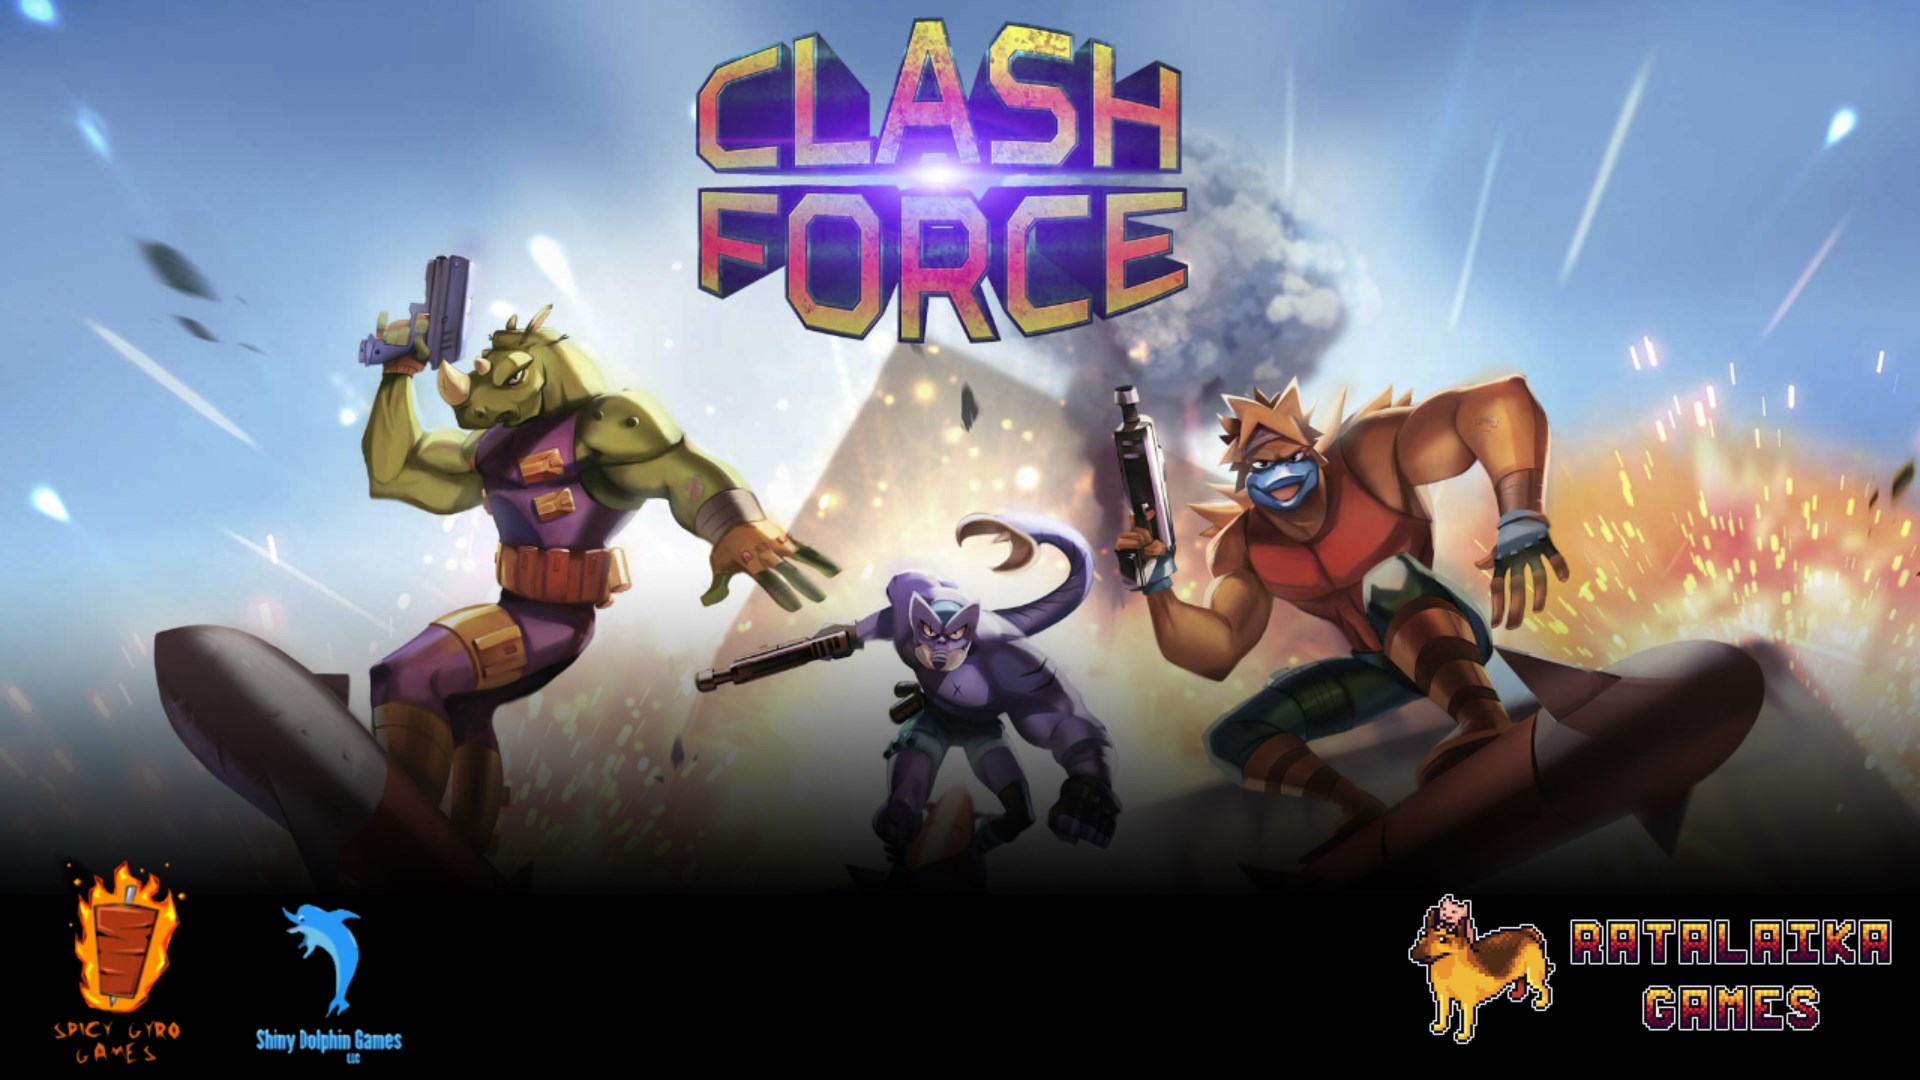 Video For Clash Force Is Now Available For Xbox One